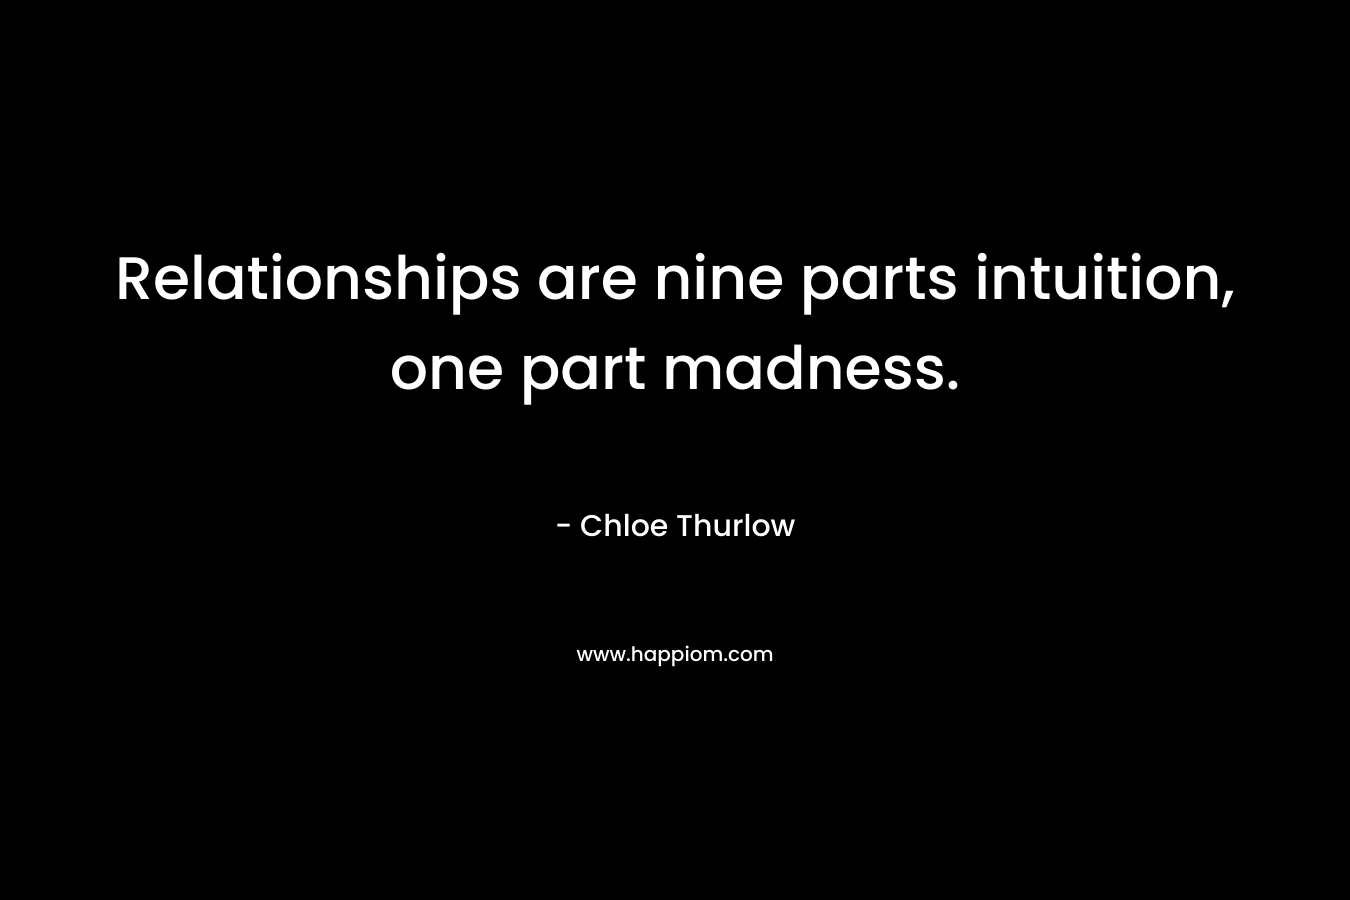 Relationships are nine parts intuition, one part madness. – Chloe Thurlow